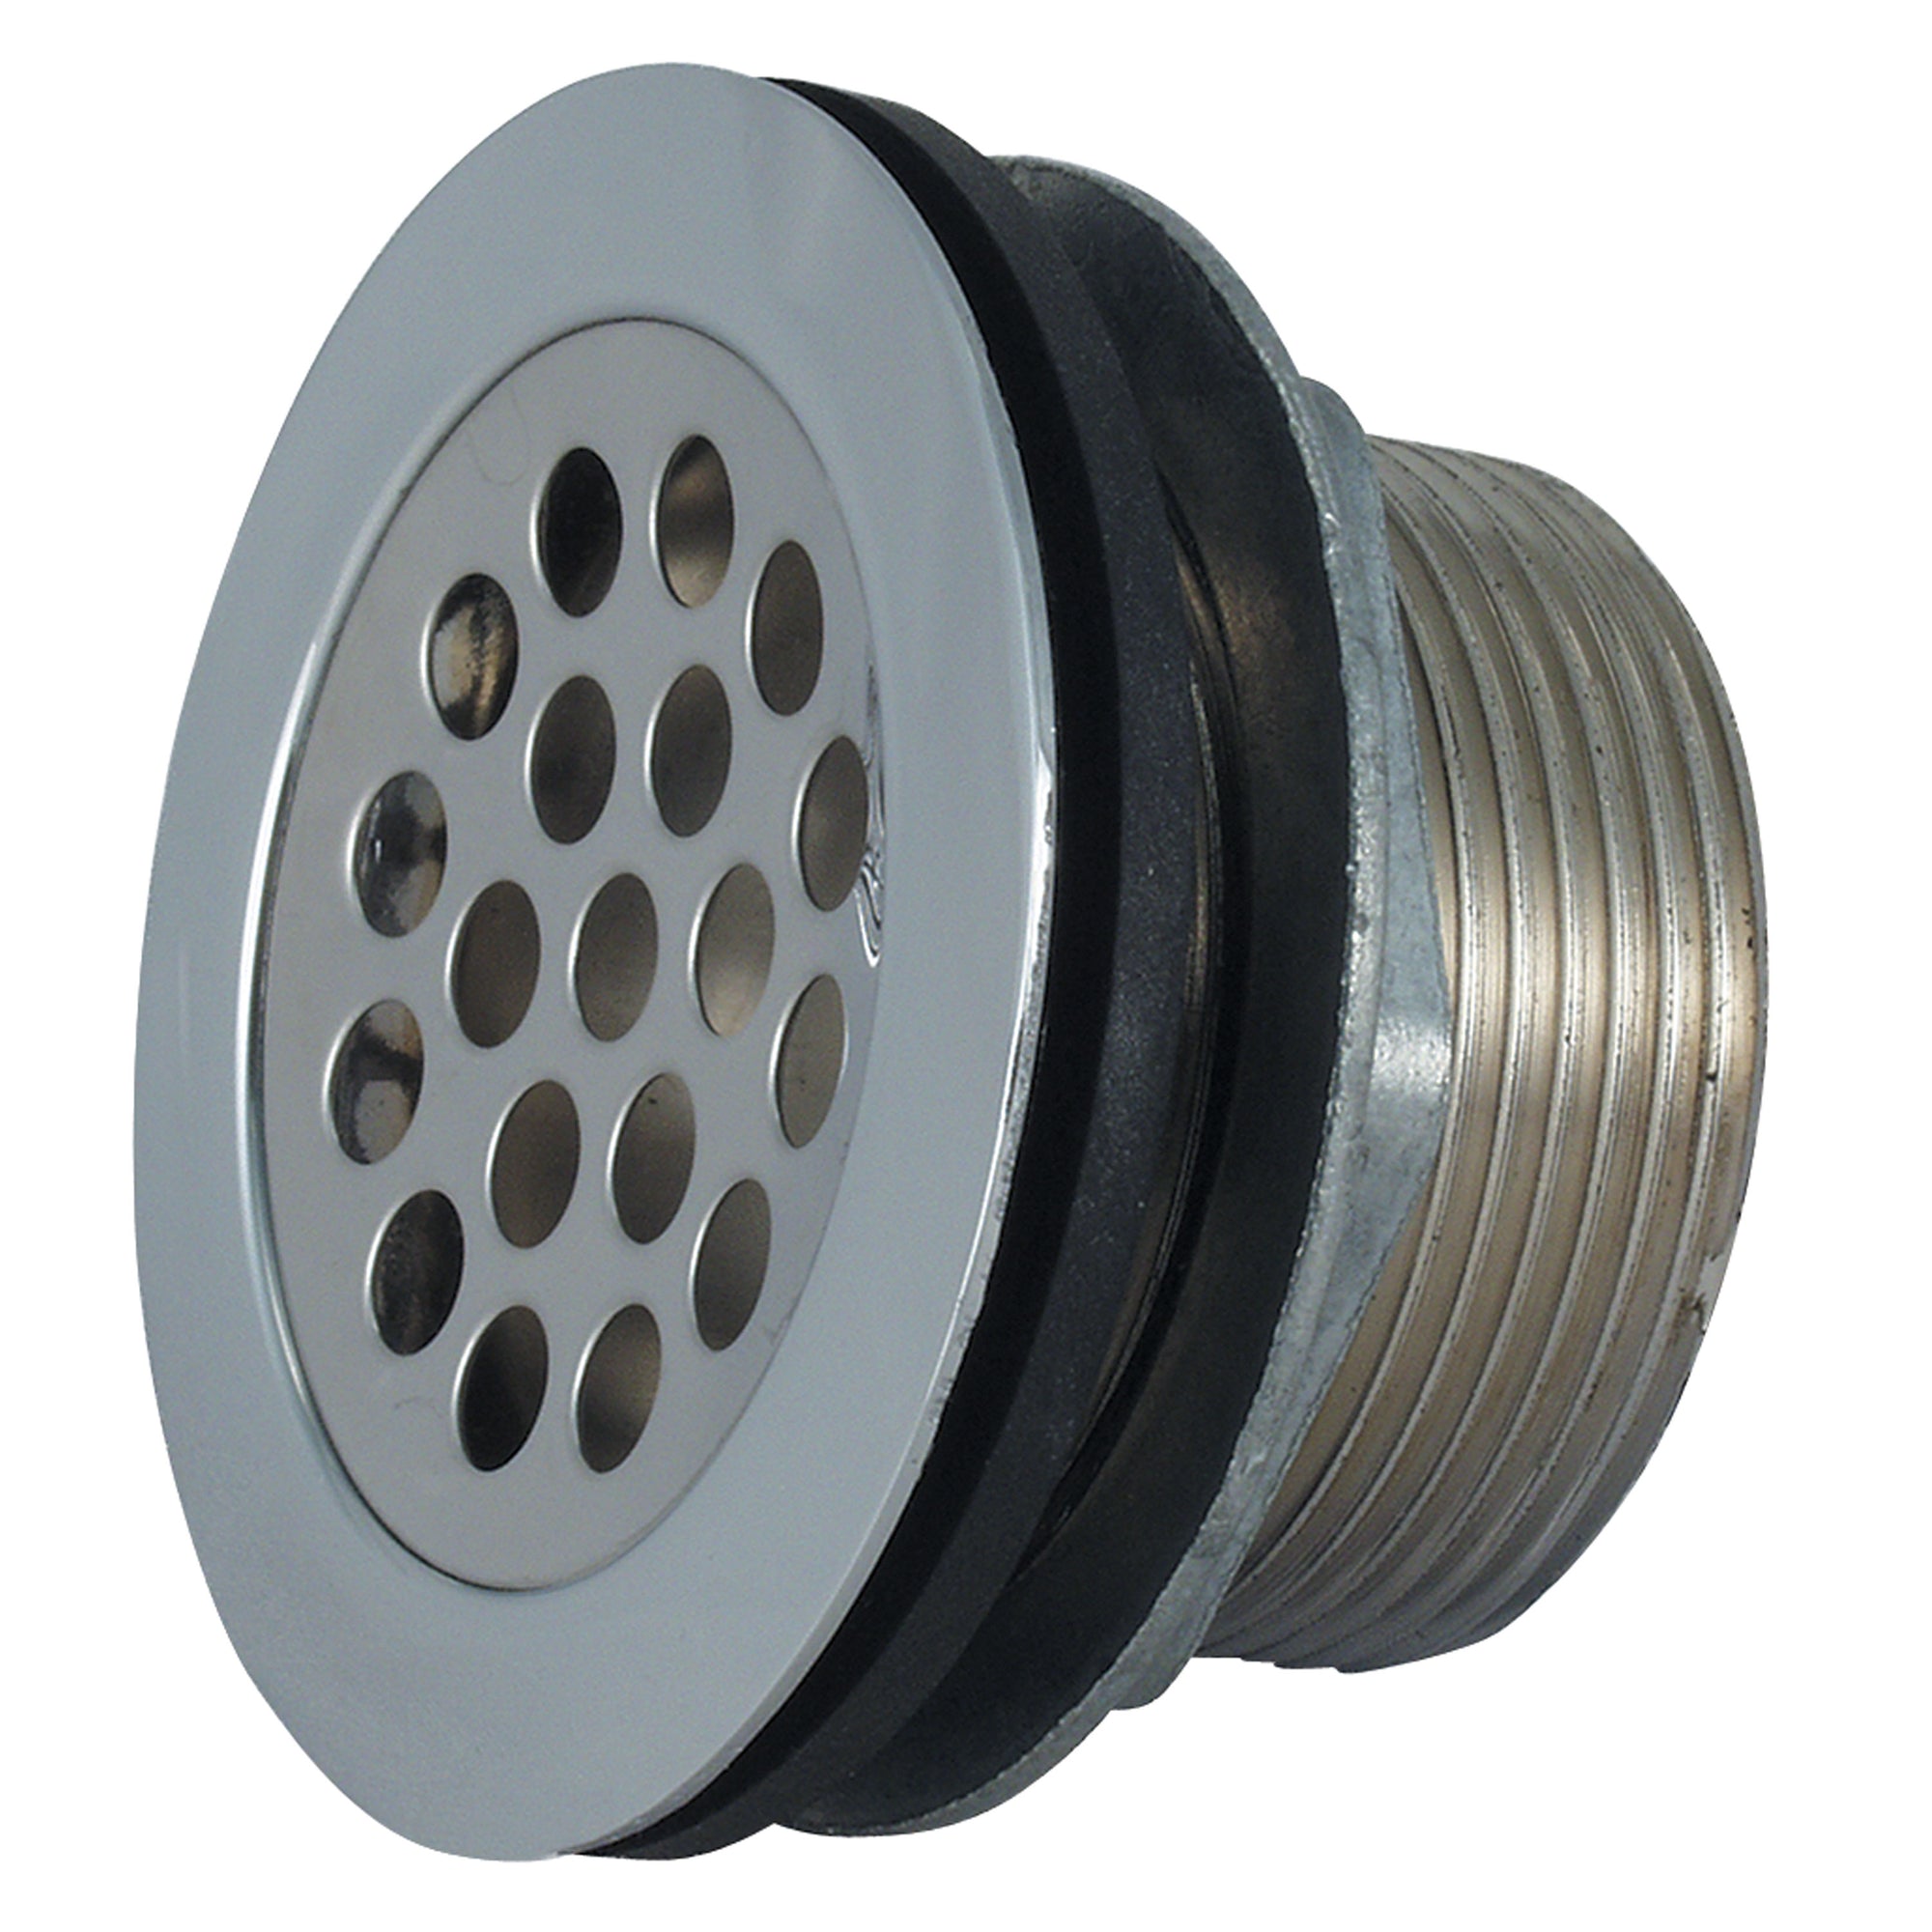 JR Products 9495-209-022 Shower Strainer with Rubber Washer